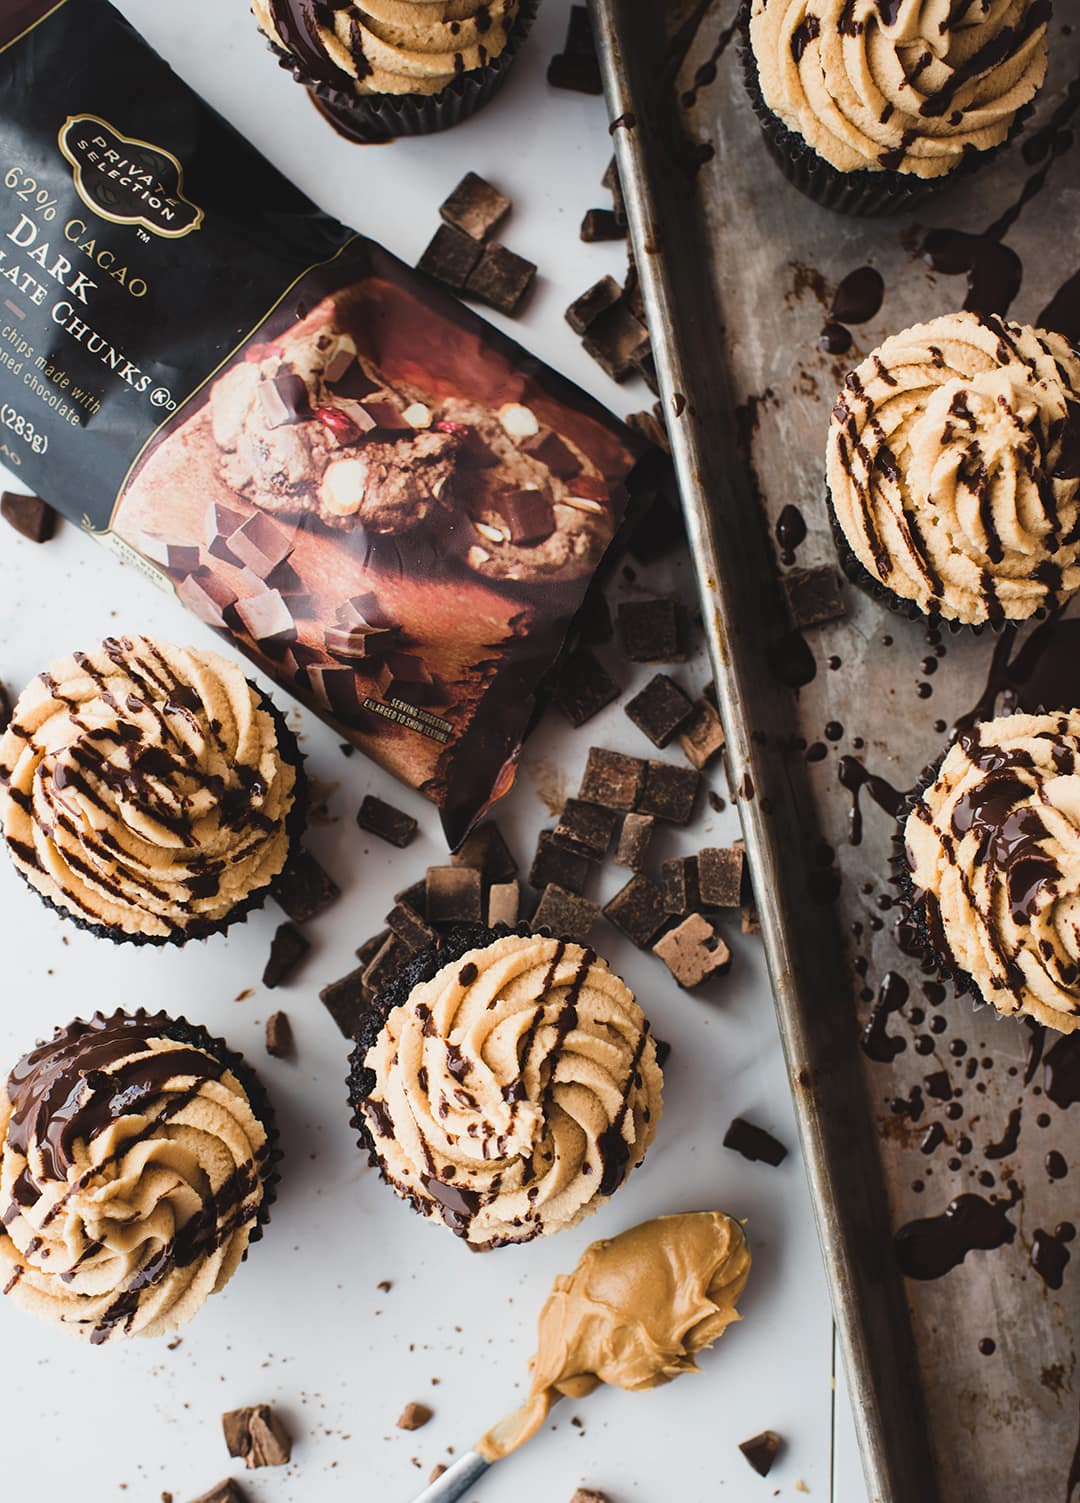 Chocolate Peanut Butter Cupcakes with Chocolate Chips